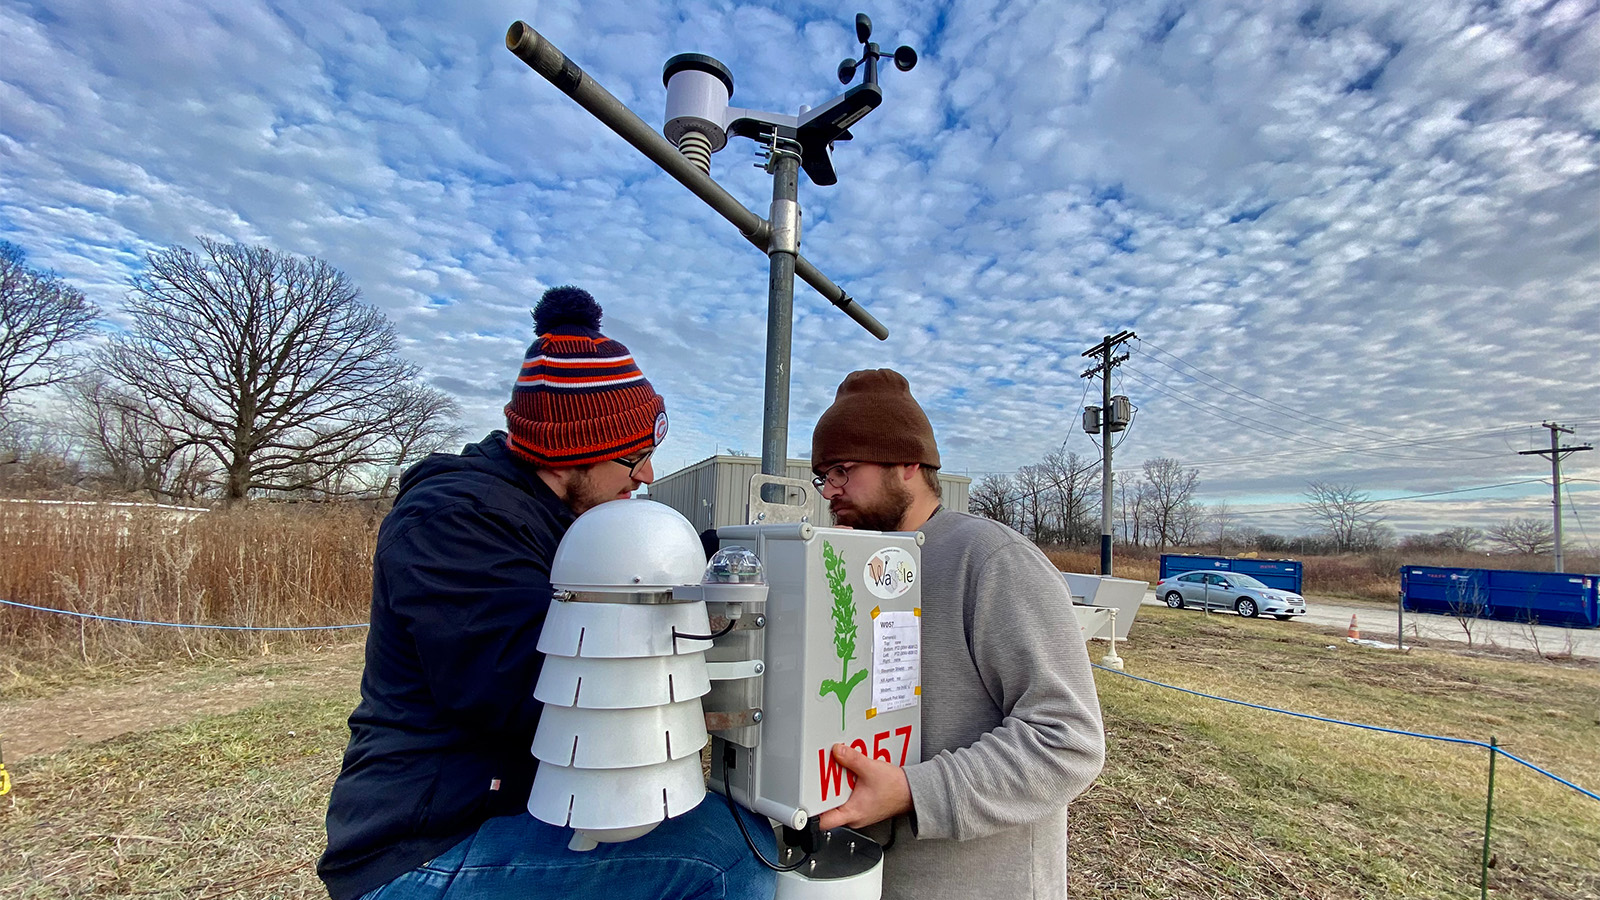 Matt Tuftedal and Joe O’Brien working on a SAGE node with a low-cost weather station mounted on the pole